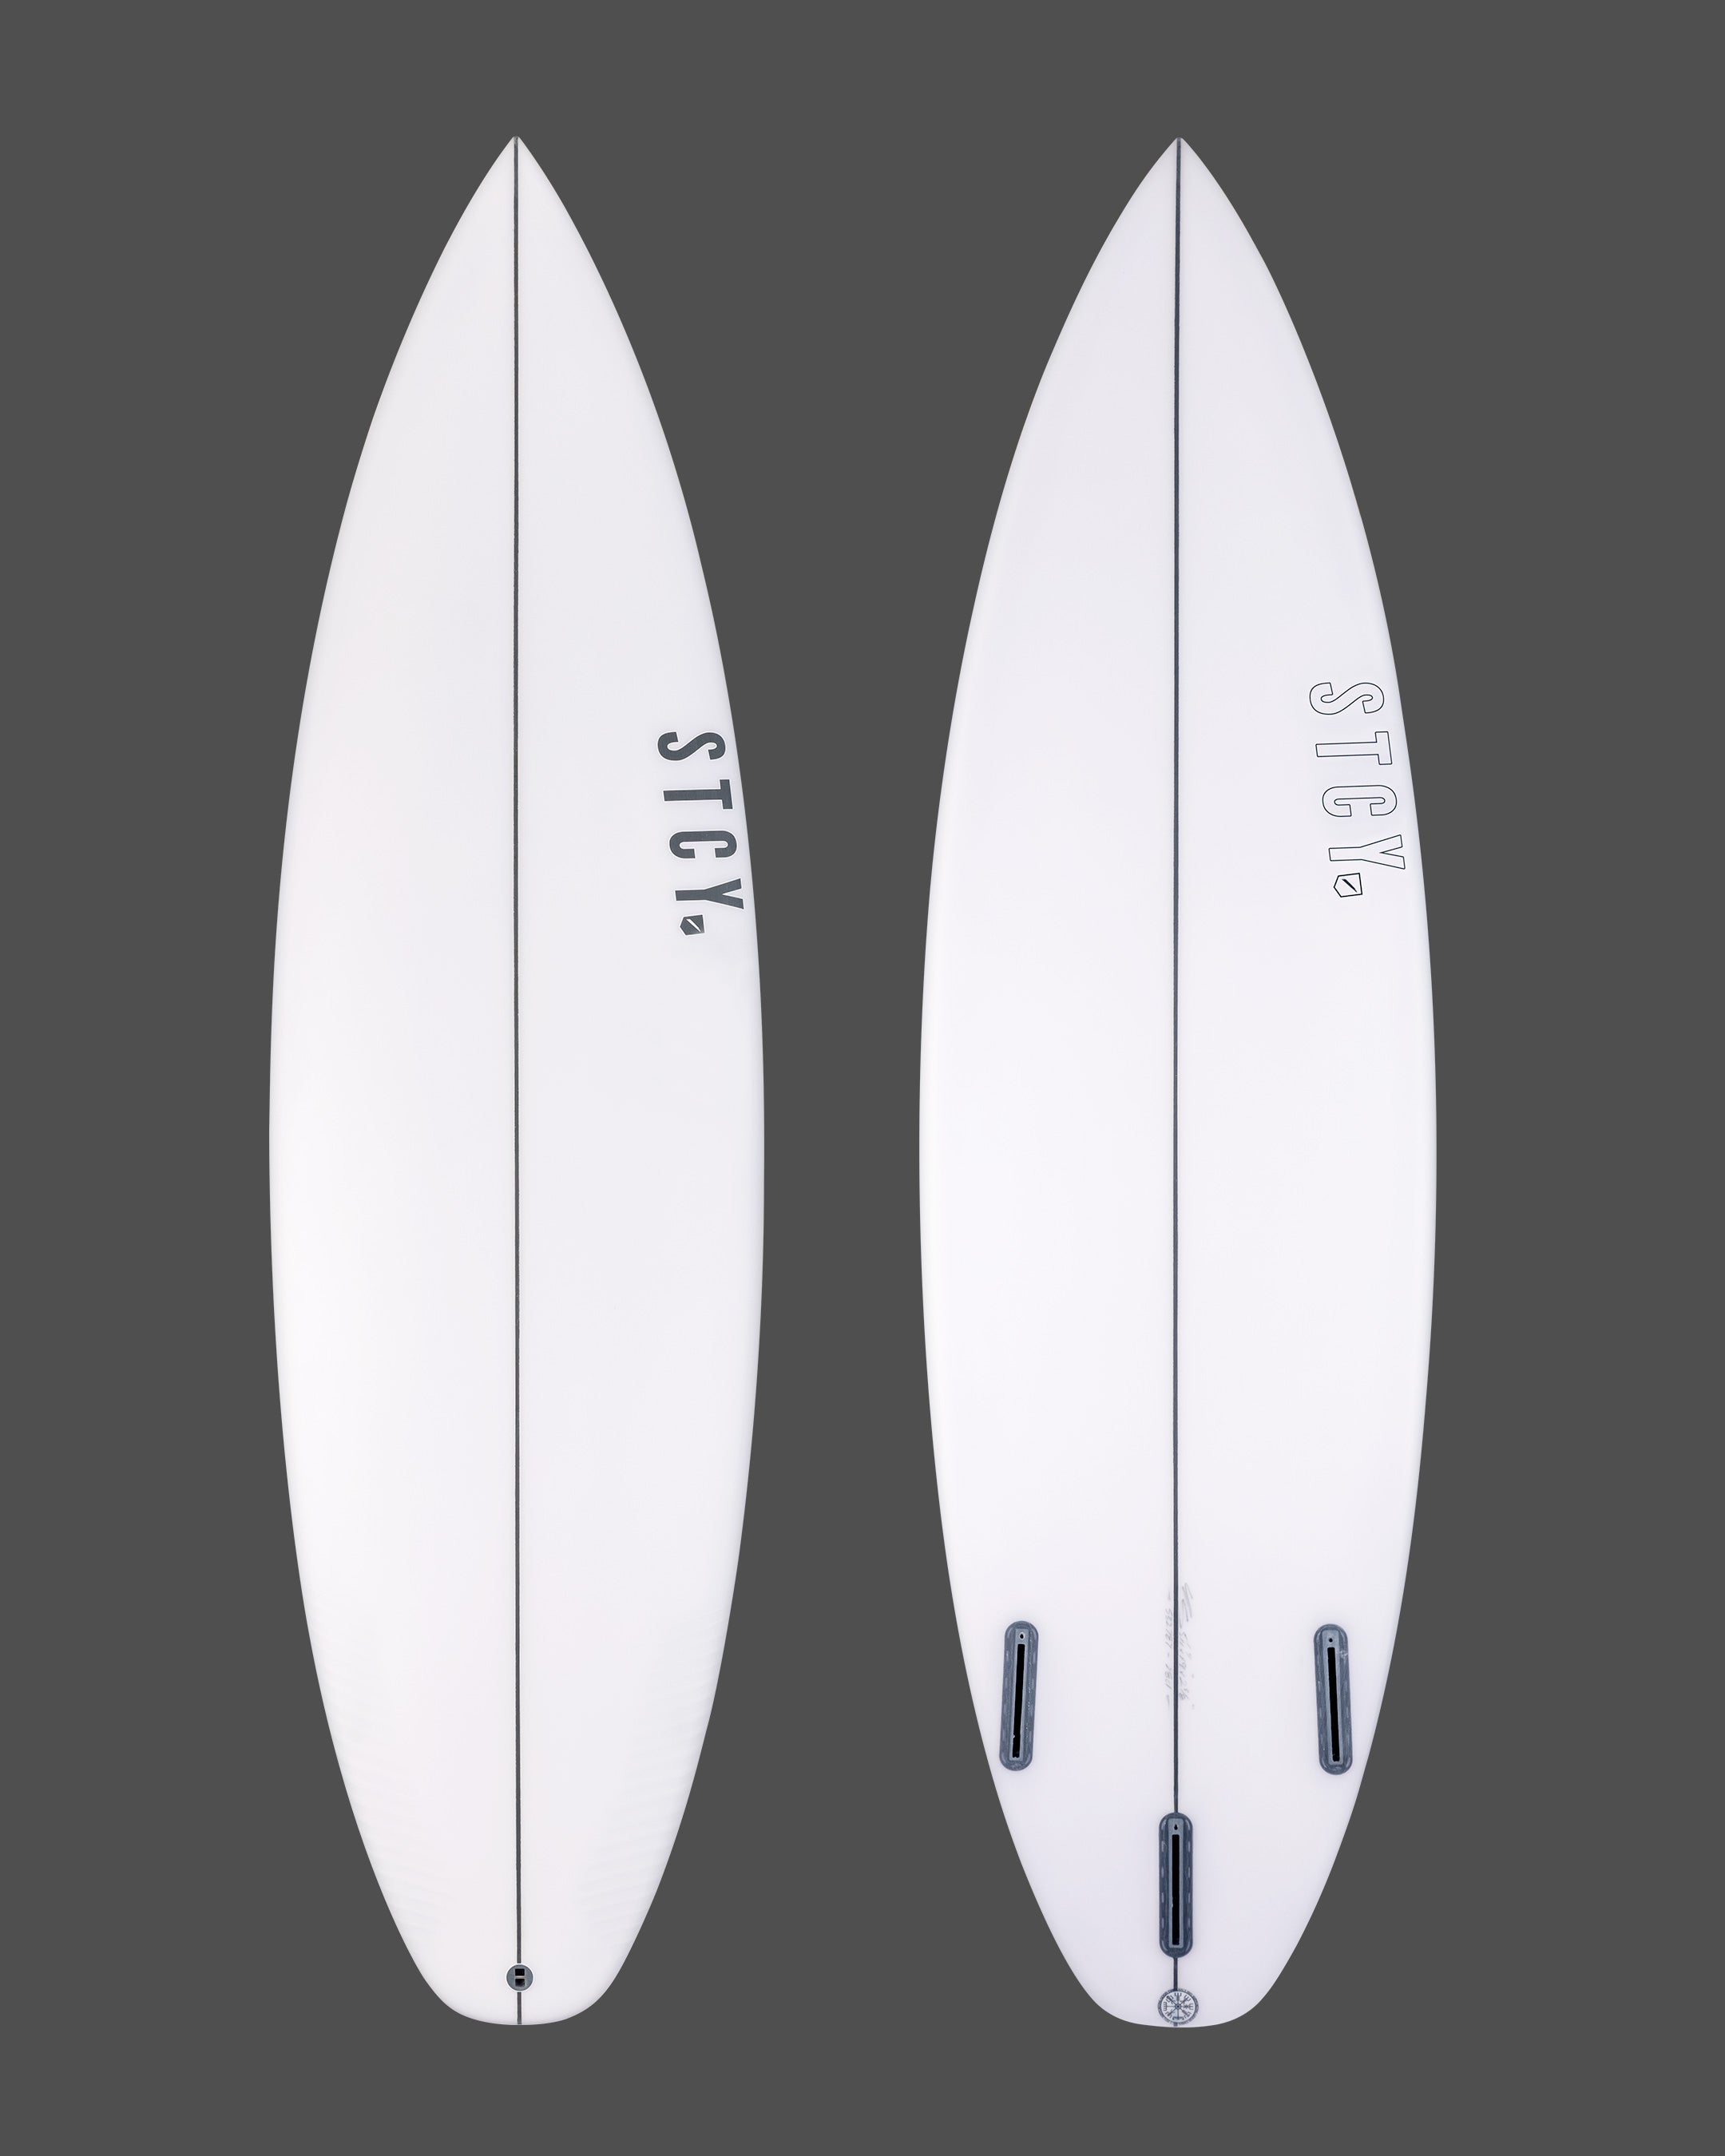 SURFBOARDS – STCY.co